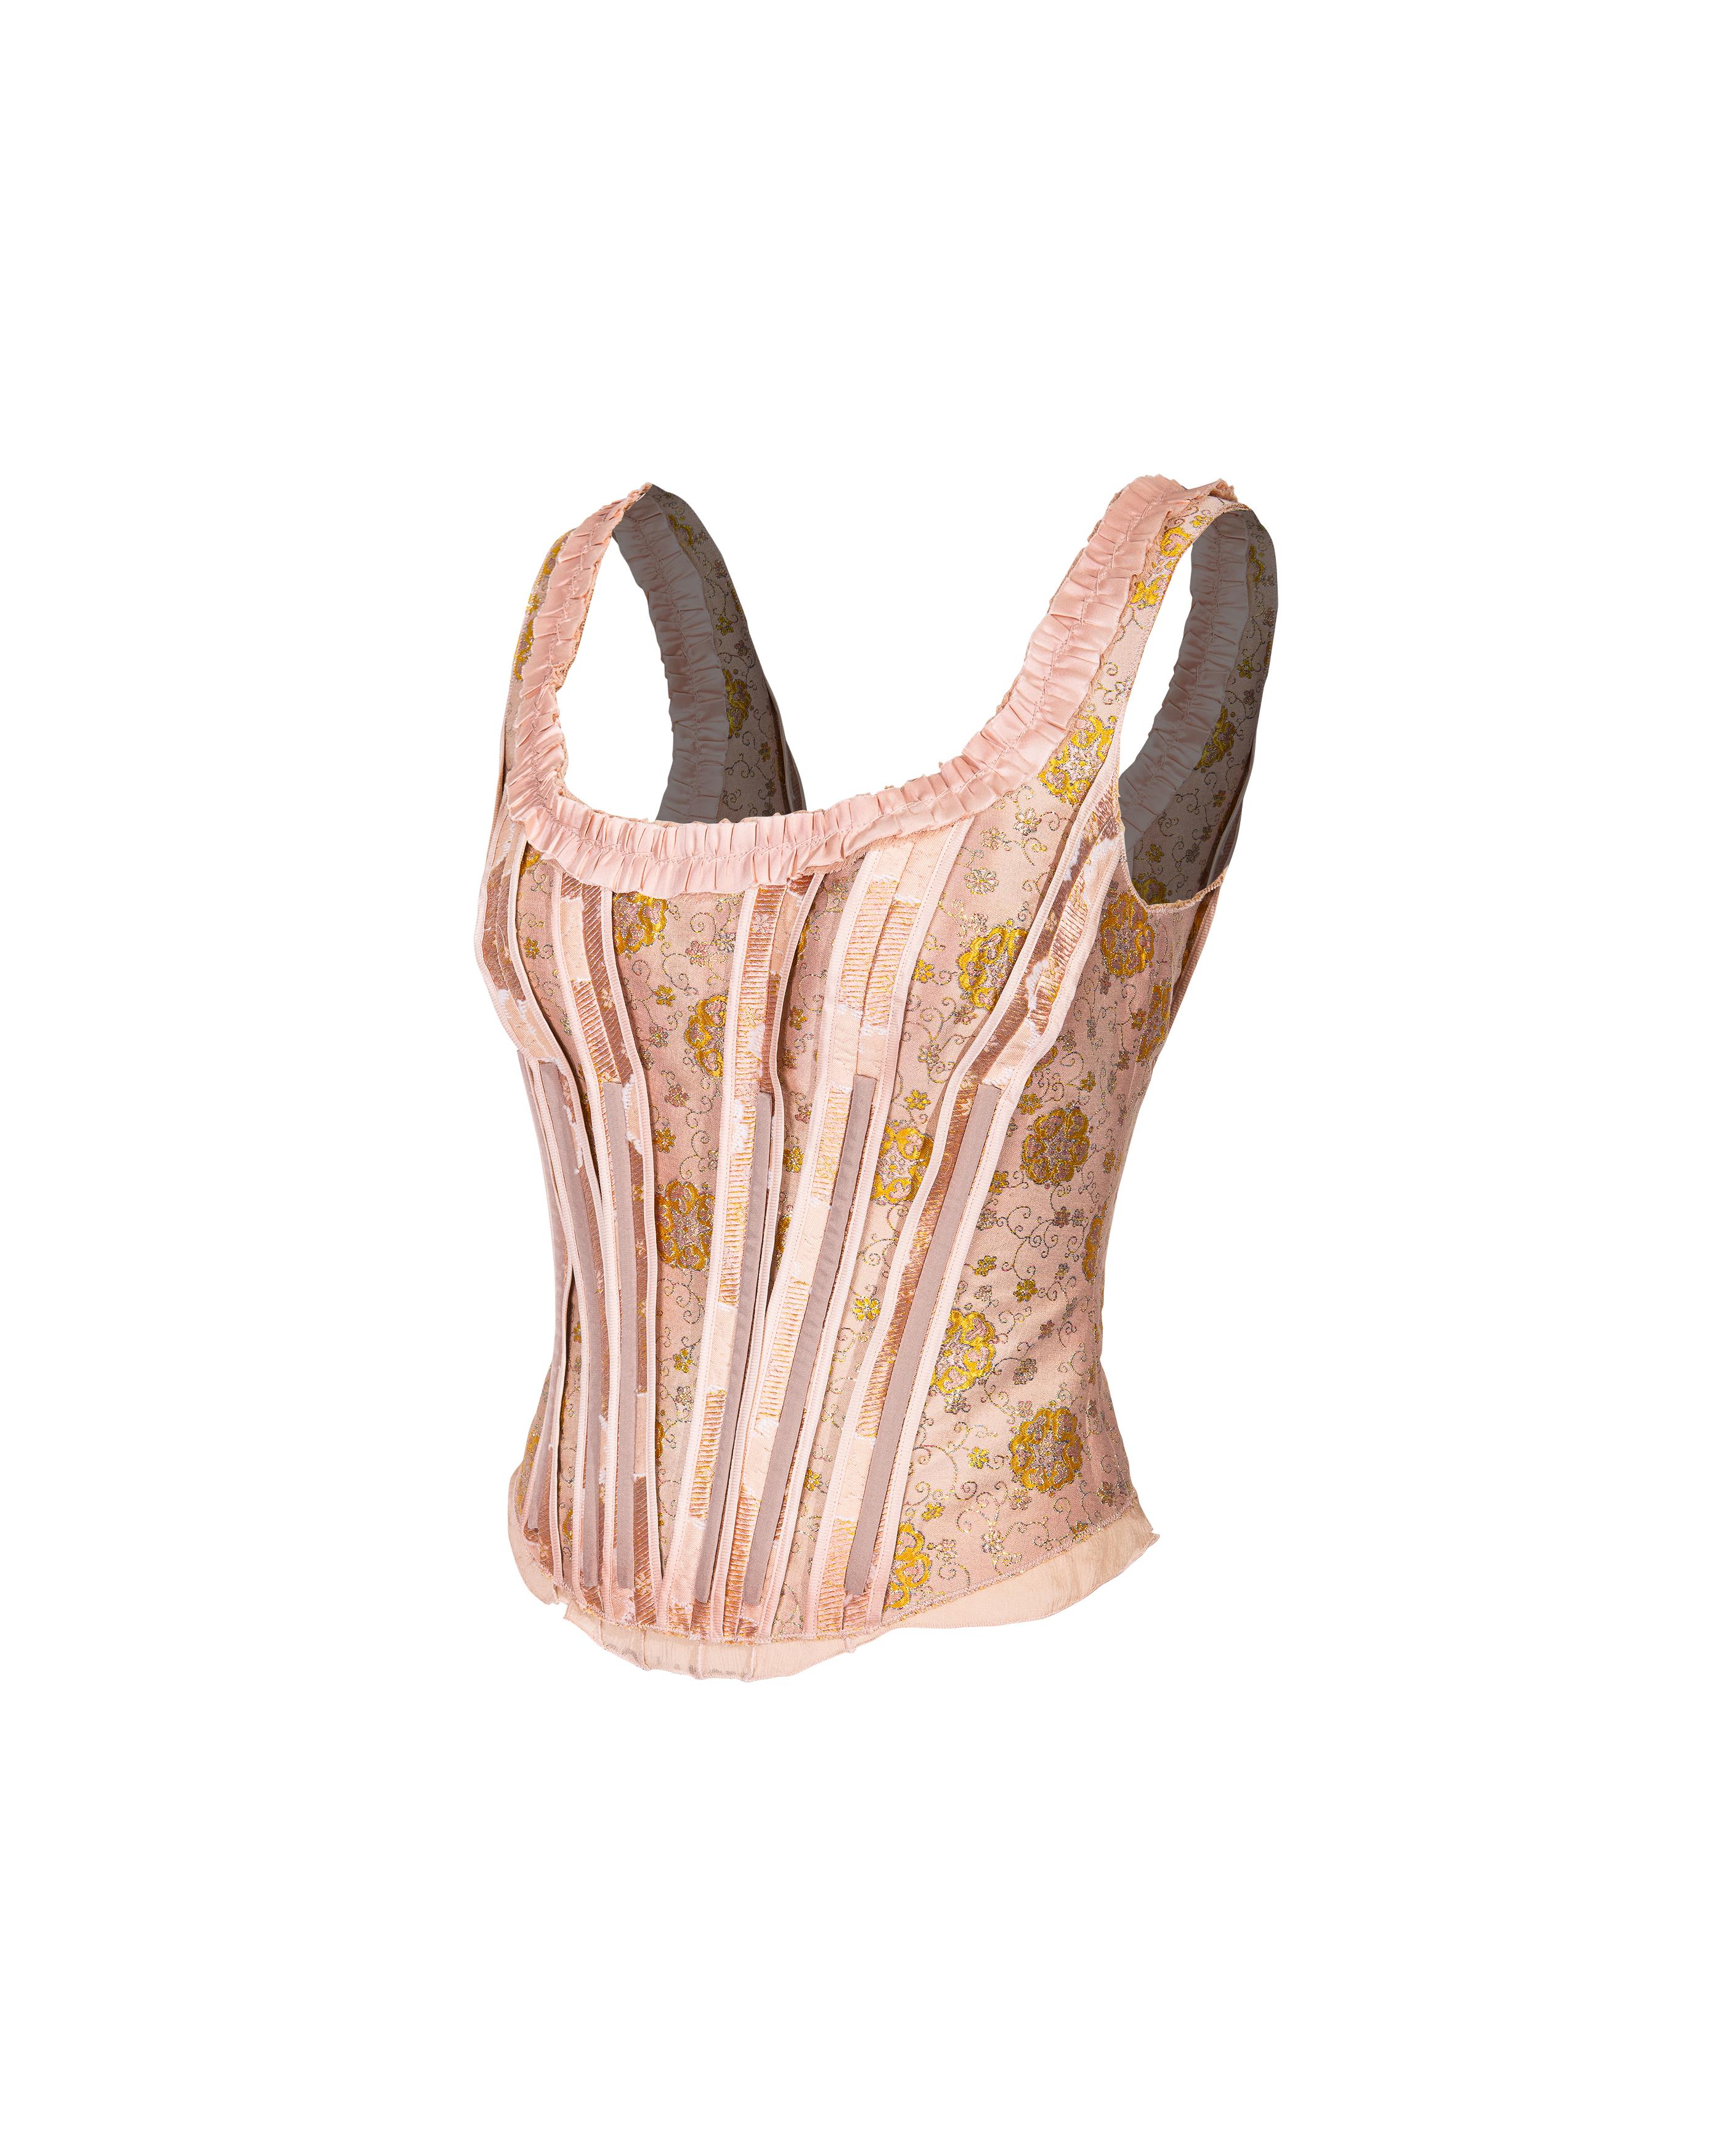 S/S 2003 Prada by Miuccia Prada blush pink floral brocade corset top with exterior gray boning. Pink silk corset with silk chiffon hemline and metallic gold floral detailing. Pink ruffle neckline and back ribbon tie. Back zip closure. An intricate